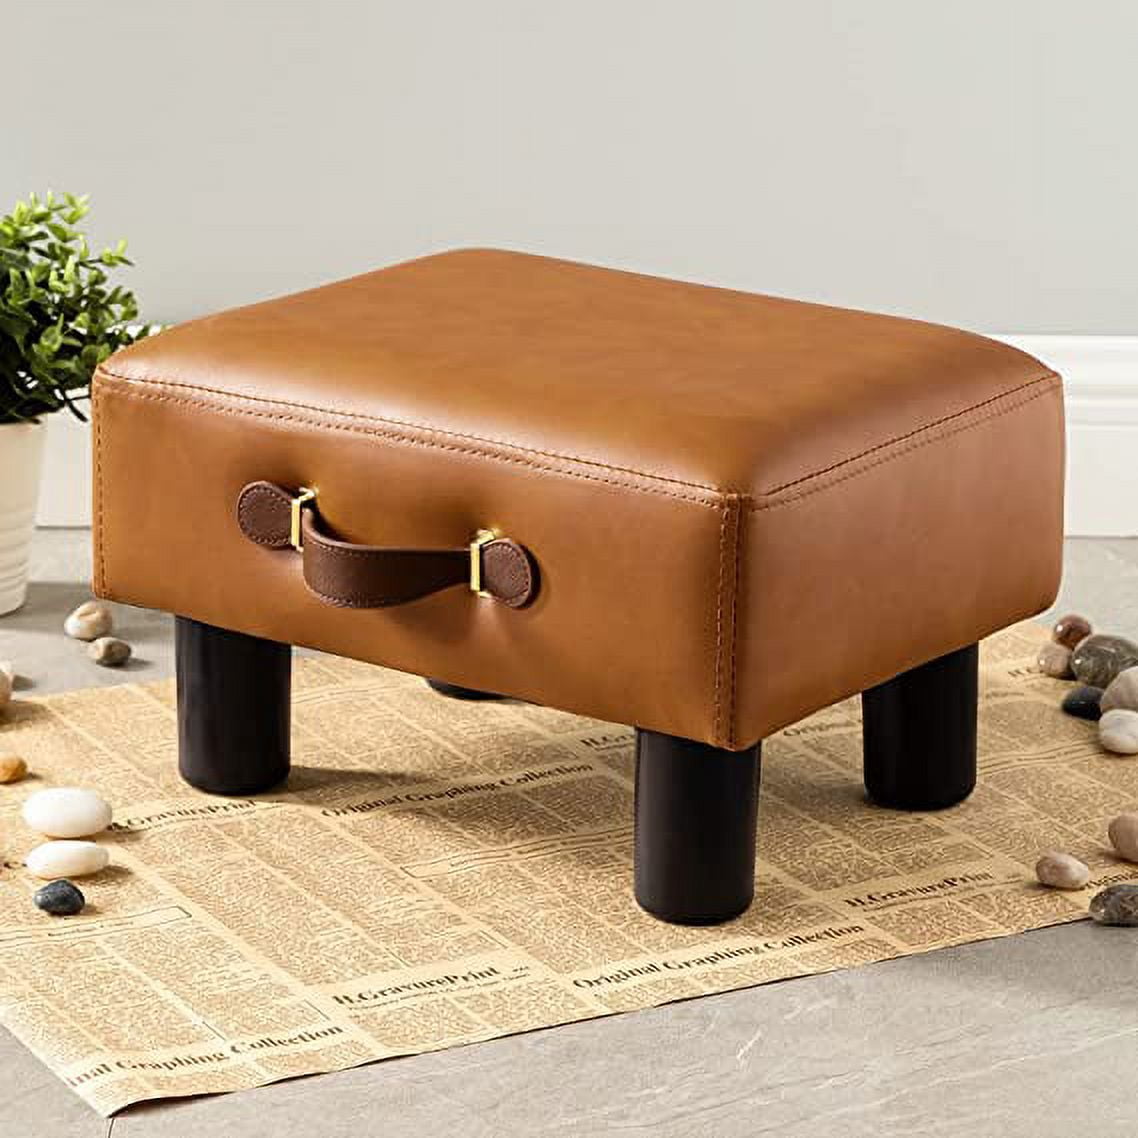 Small Foot Stool with Handle, Whisky Brown PU Leather Short Foot Stool  Rest, Rectangle Storage Foot Stools Ottoman with Plastic Legs, Padded  Footstool Small Step Stool for Living Room, Office, Patio 